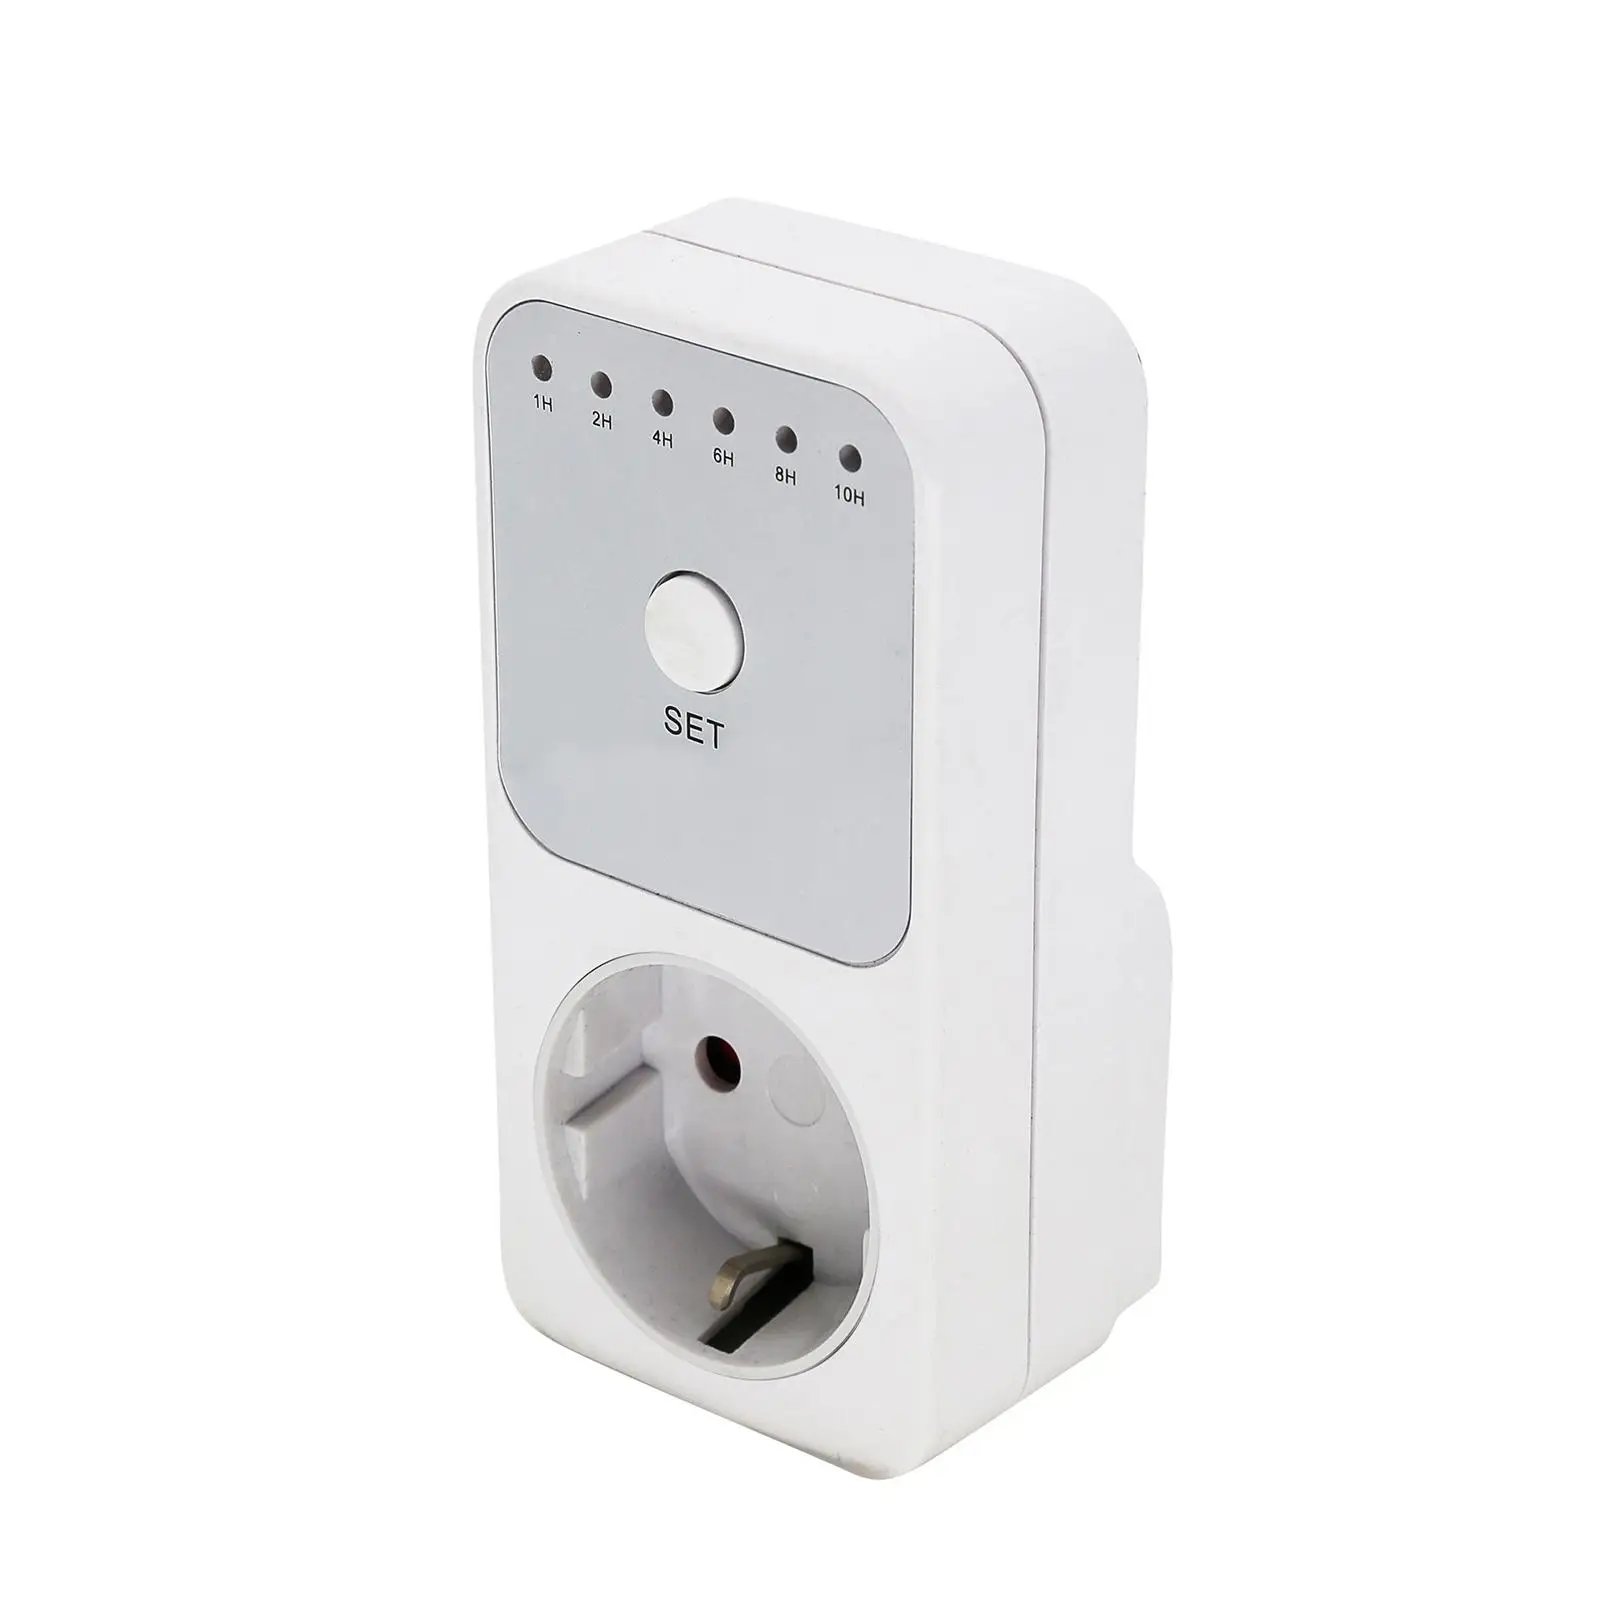 Timing Socket Cordless Wall Plug Energy Saving Time Switch Indoor Intelligent Socket Plug Auto Shut Off for Travel Lamps